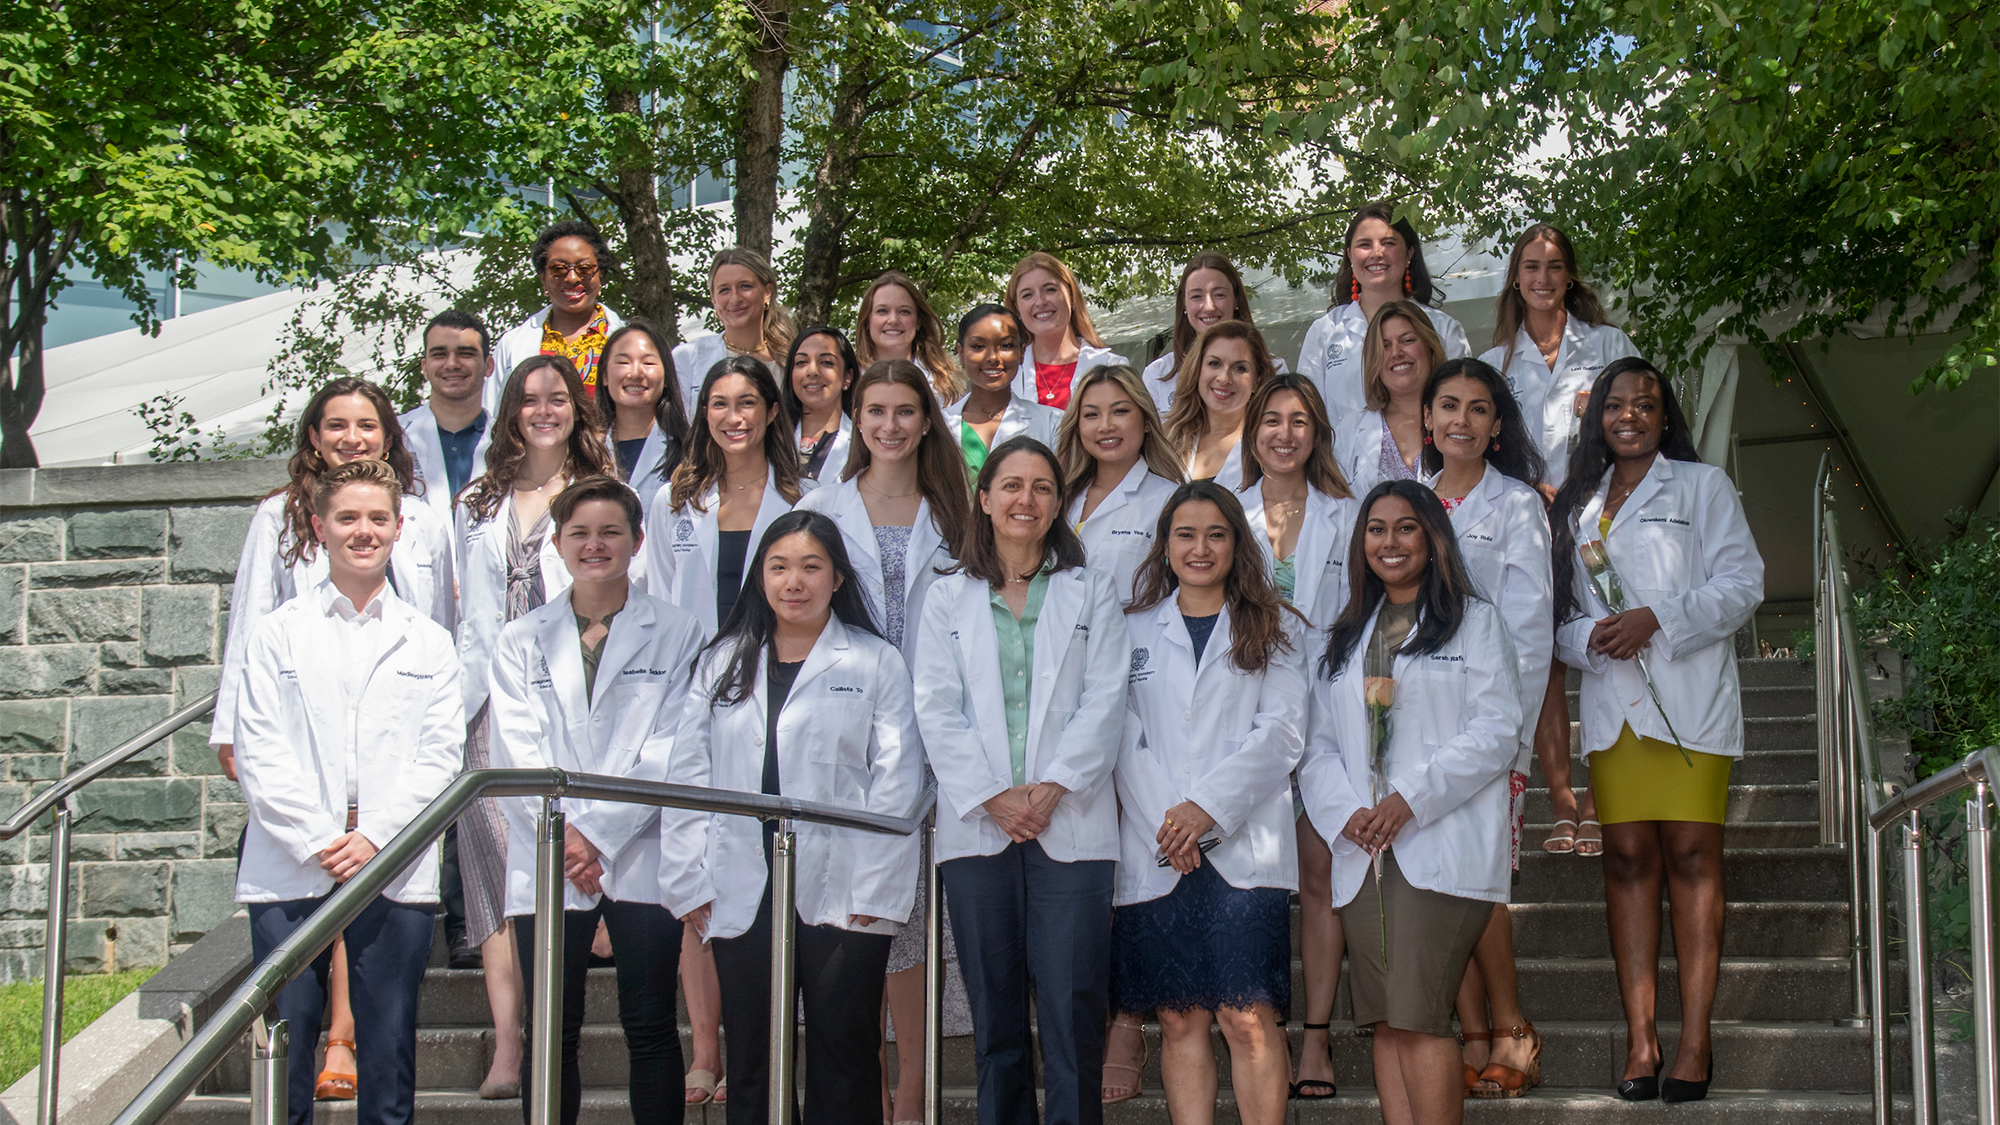 The CNL students in their White Coats stand together